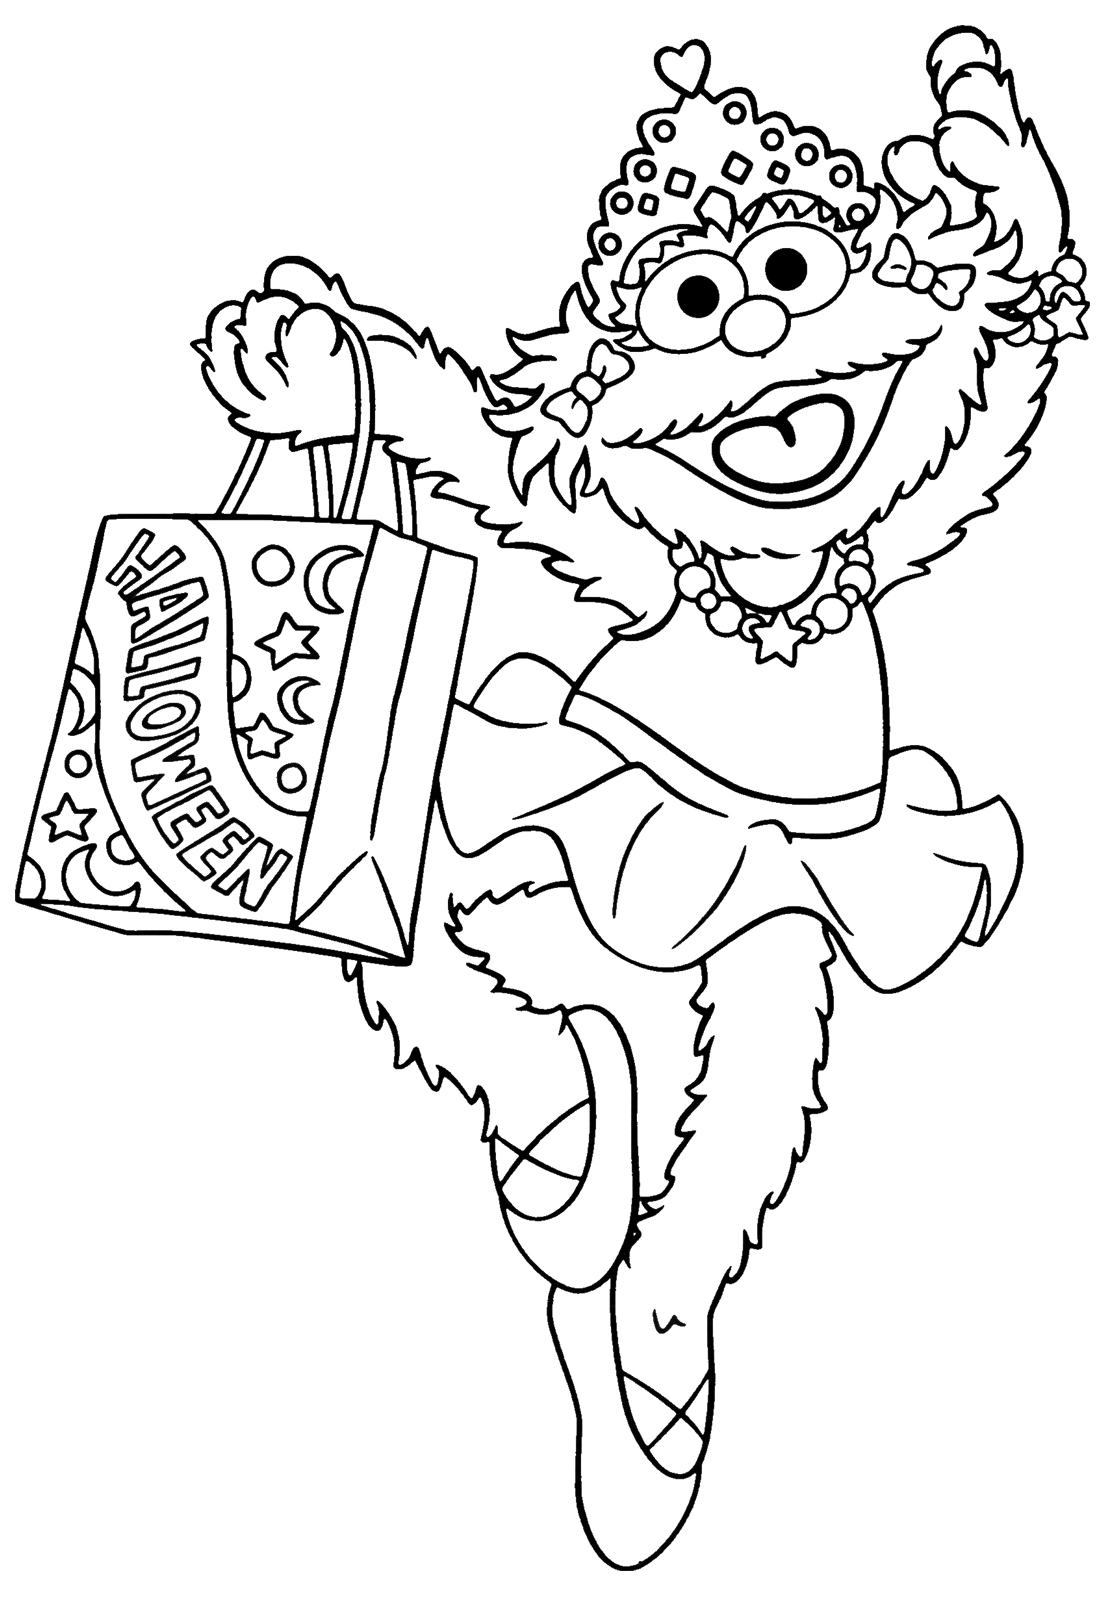 Sesame street coloring pages to download and print for free